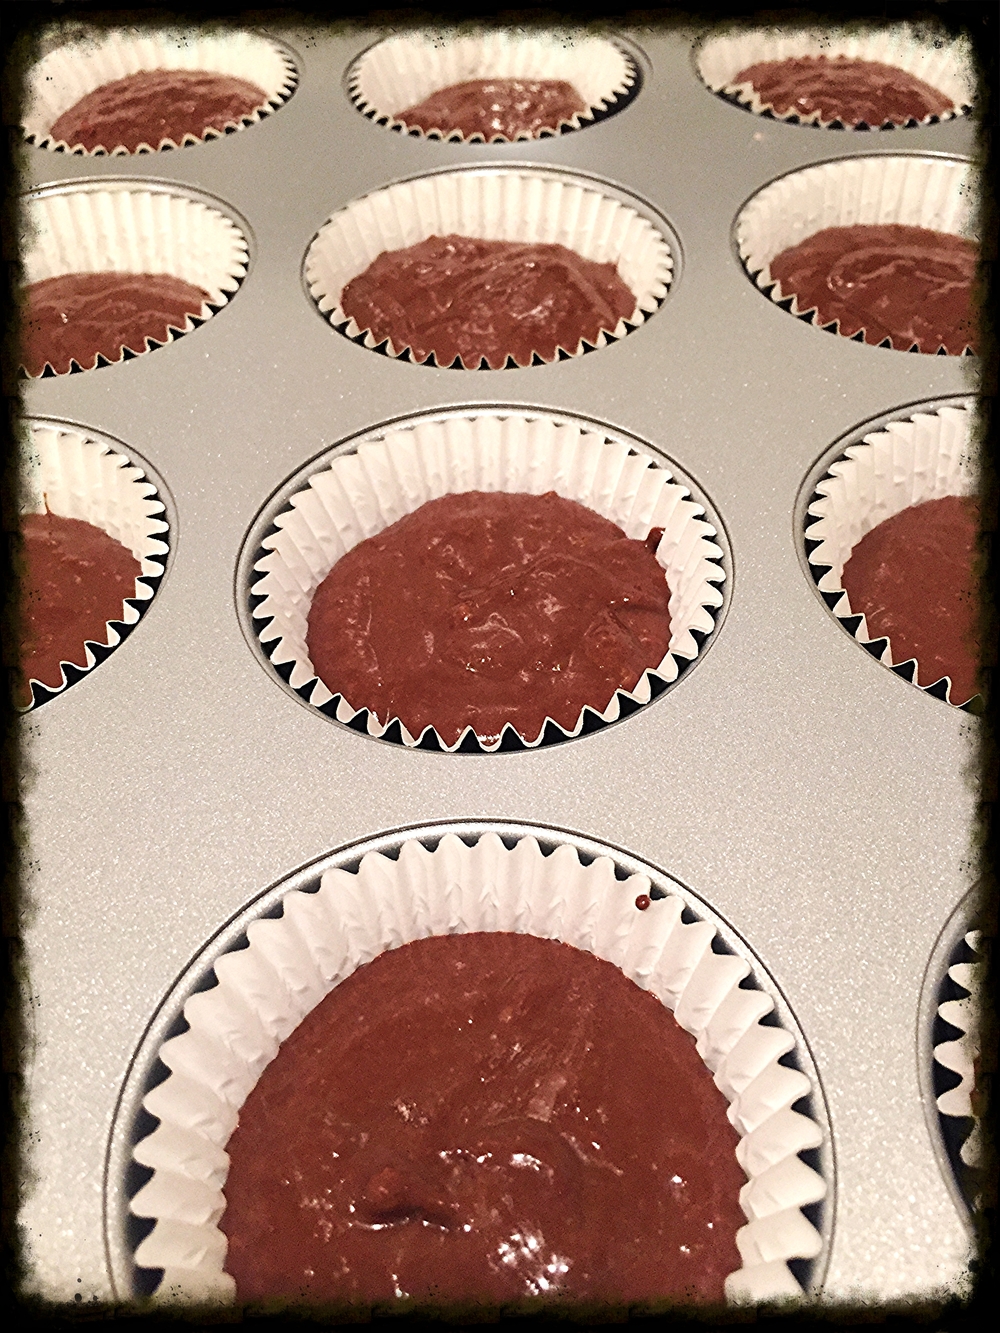 Step 7: Pour batter into cupcake liners